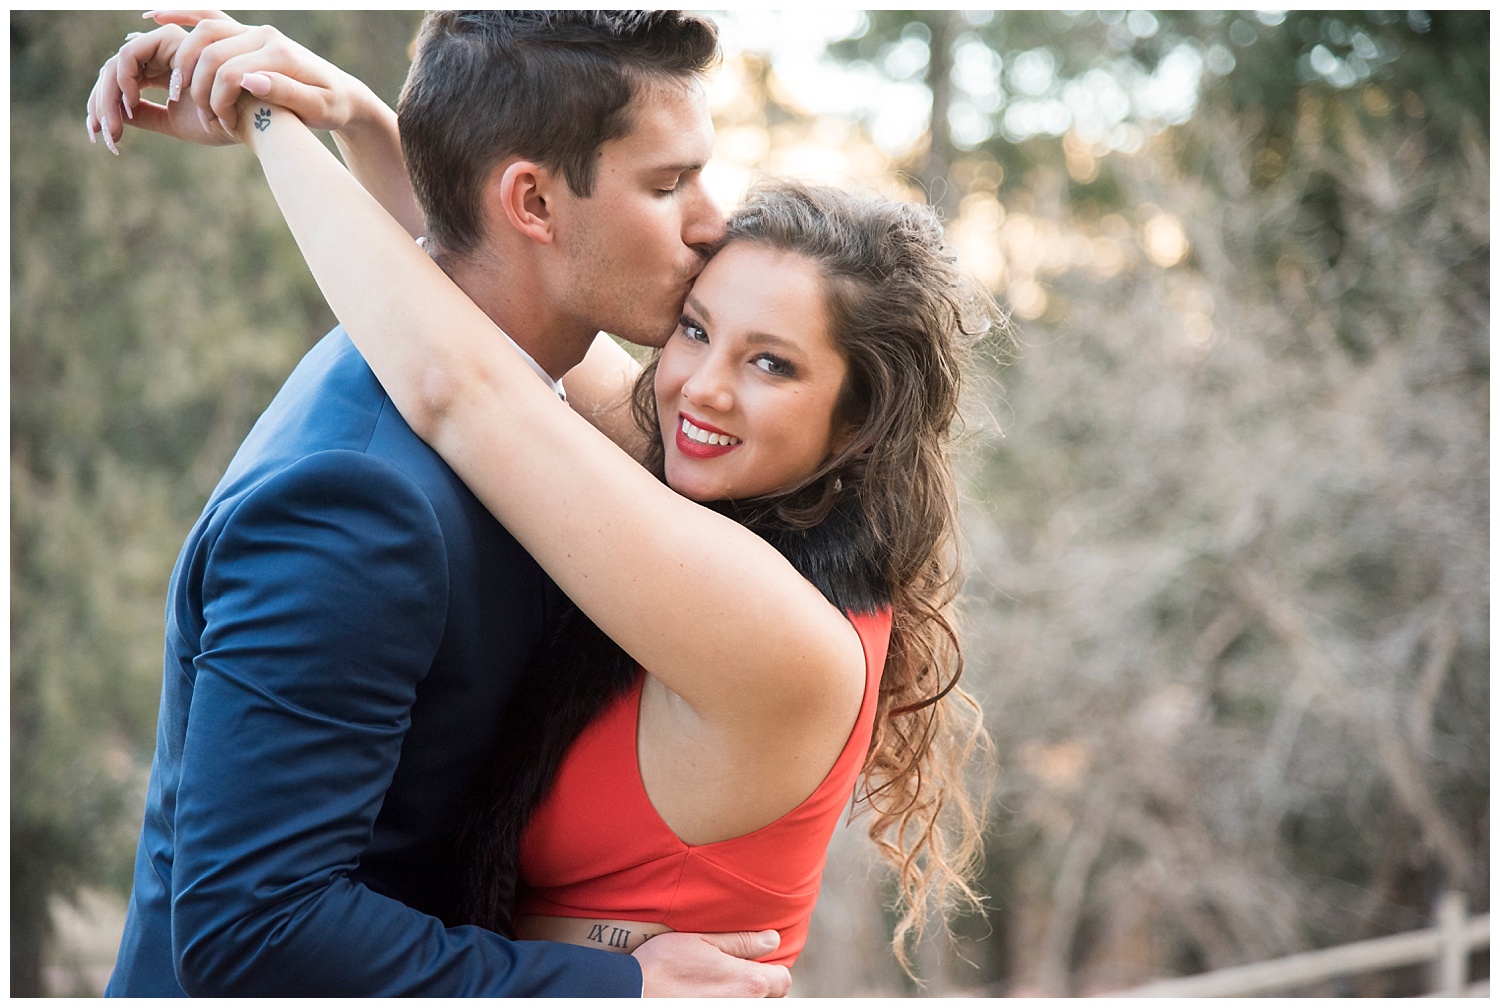 Man Kissing Woman While She Looks at Camera | Nicholas and Eden's Surprise Proposal at Glen Eyrie Castle | Colorado Springs | Farm Wedding Photographer | Apollo Fields Wedding Photojournalism